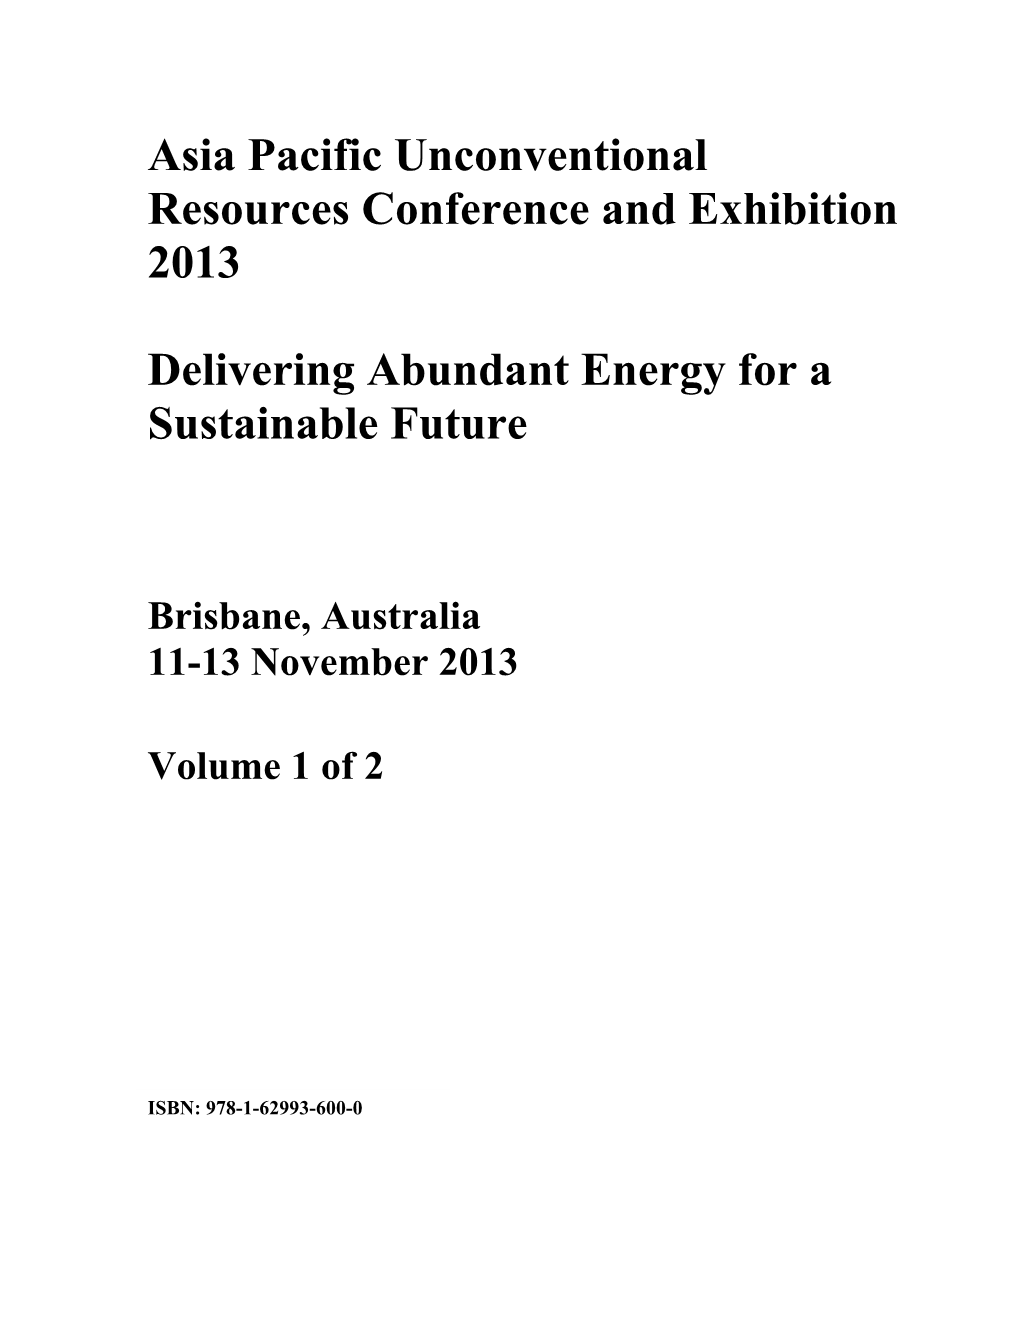 Asia Pacific Unconventional Resources Conference and Exhibition 2013